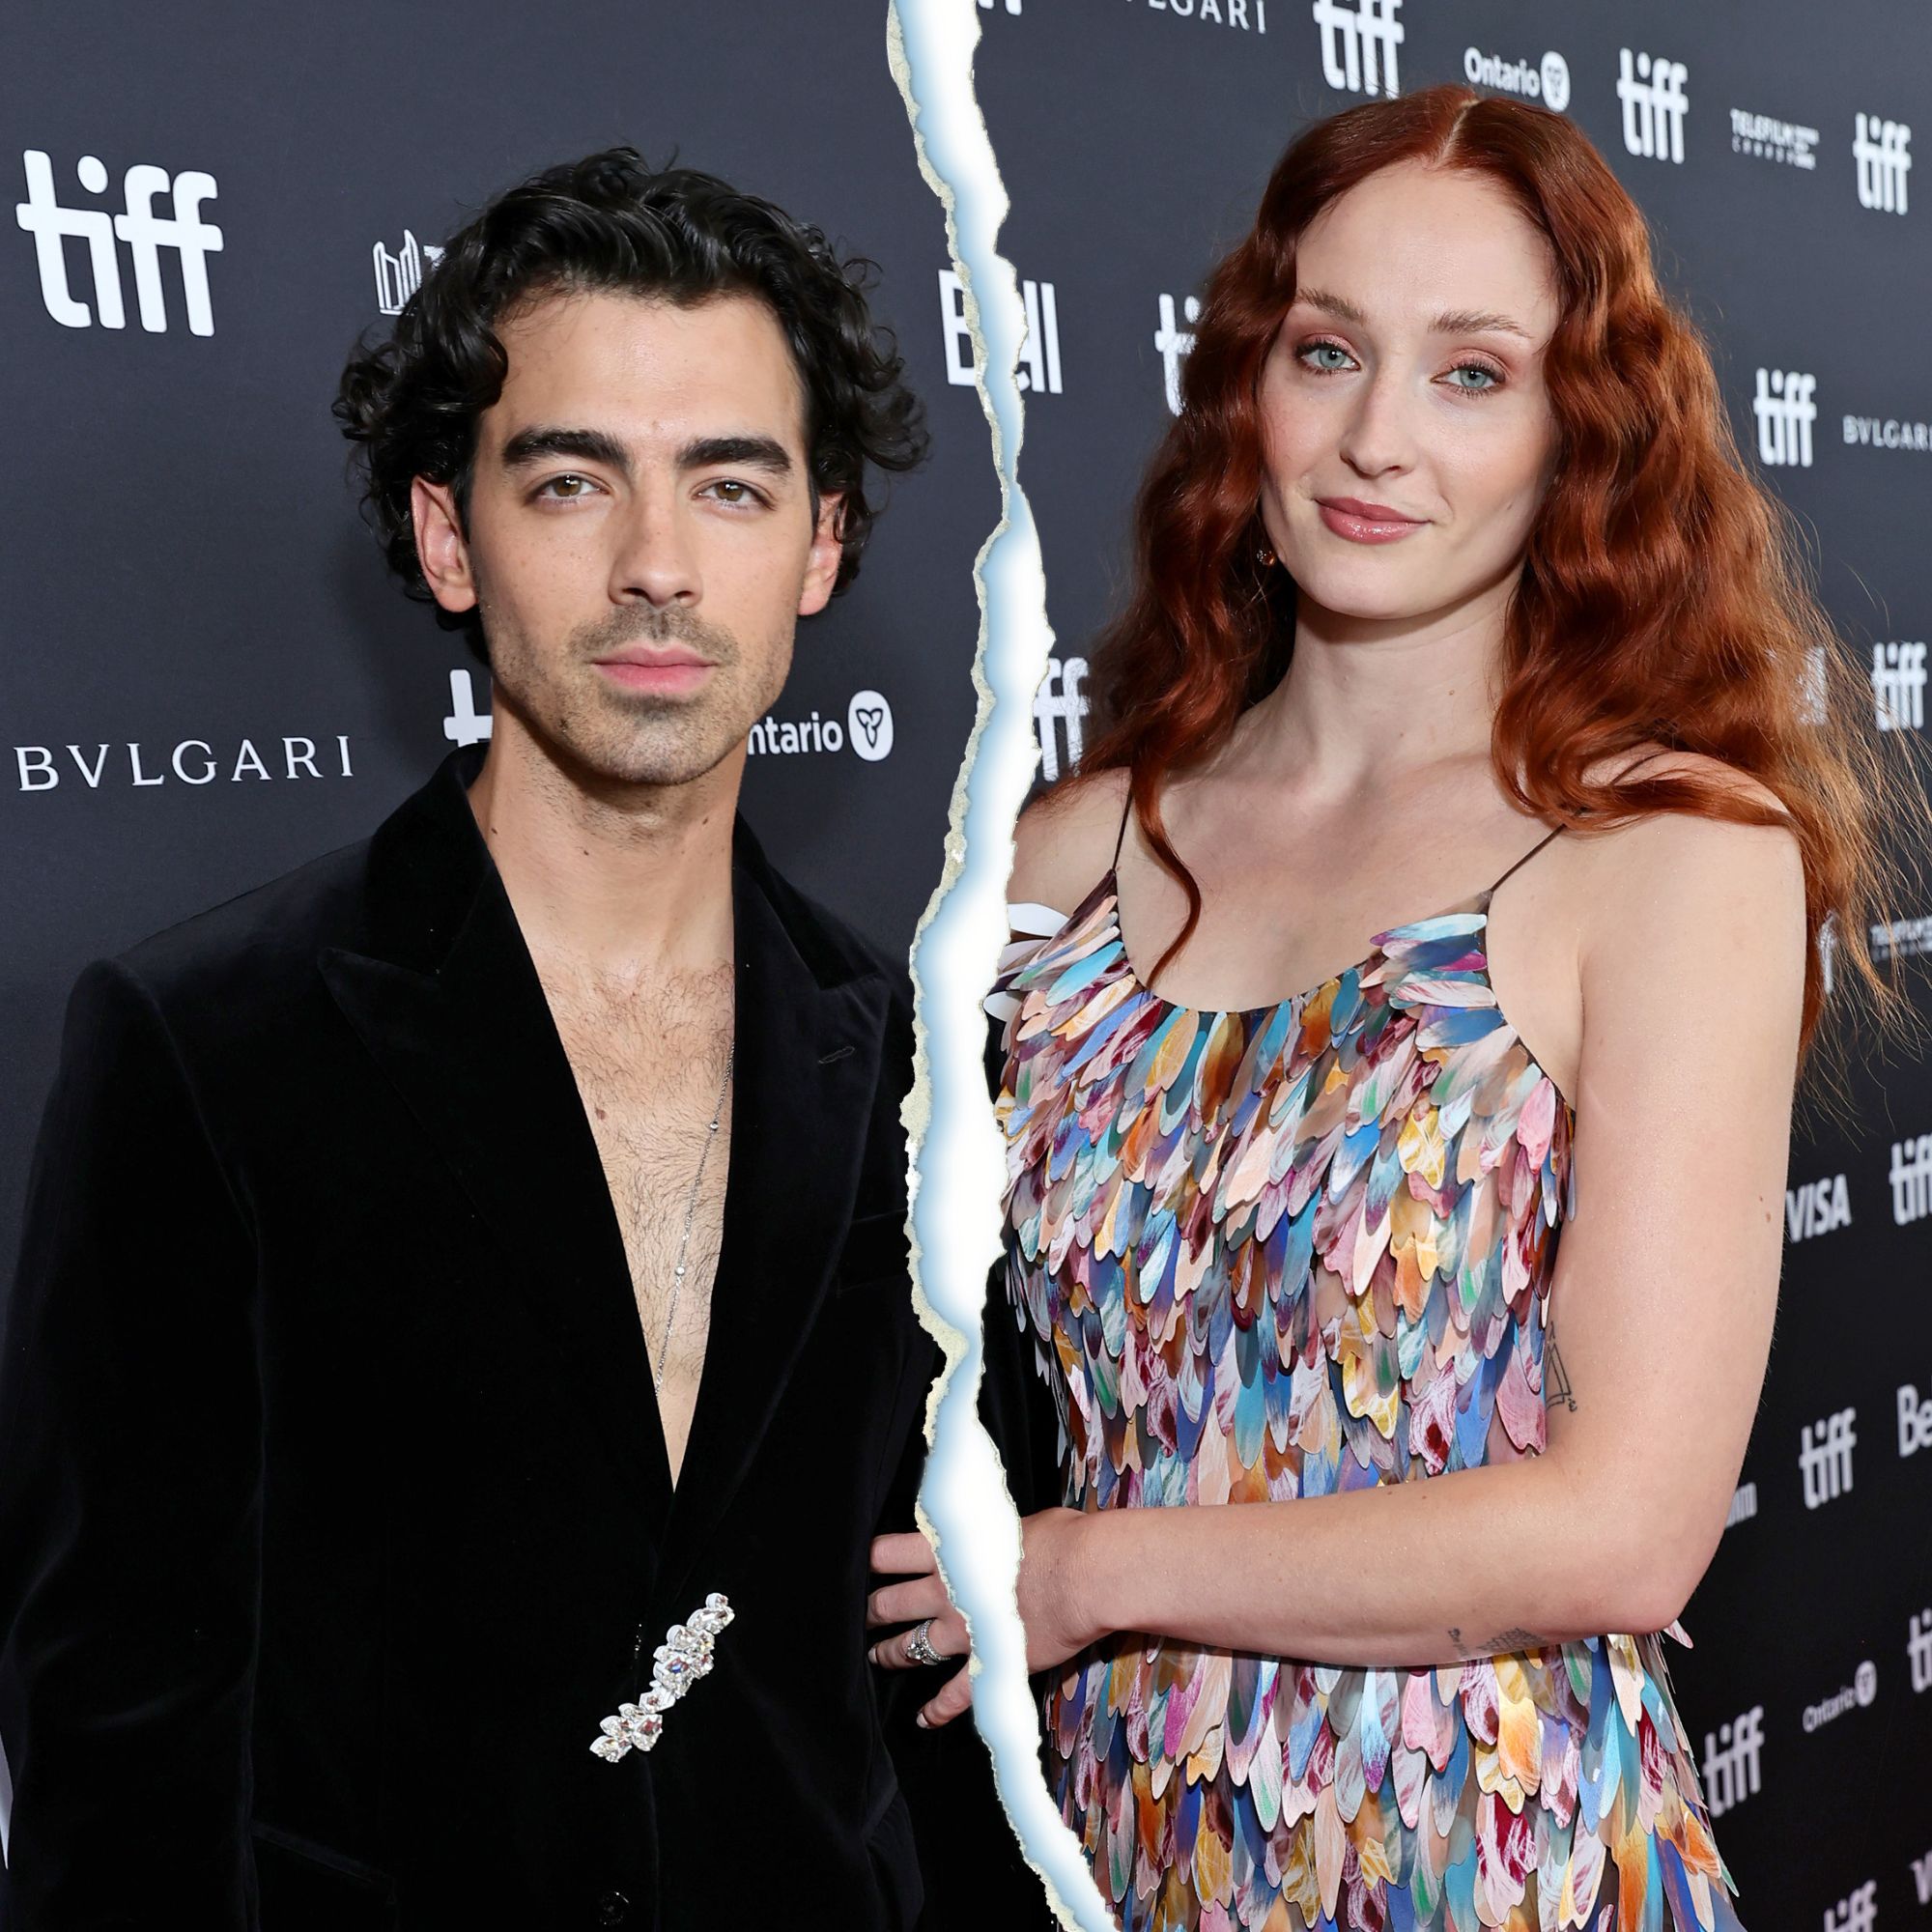 Joe Jonas files for divorce from Sophie Turner after 4 years of marriage